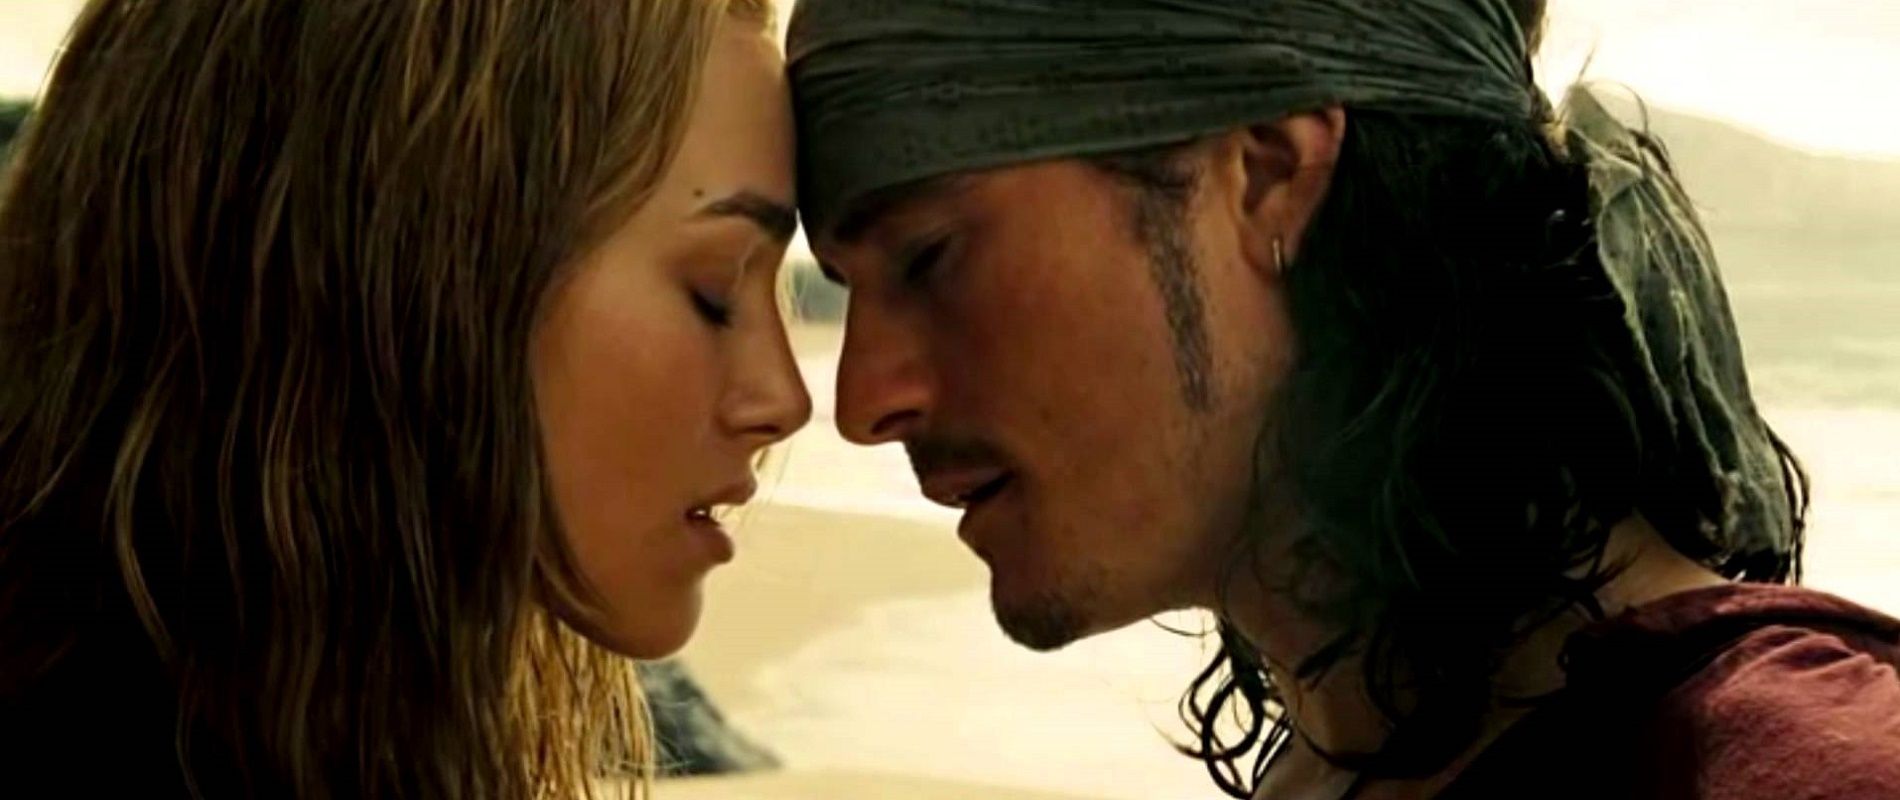 Keira Knightley and Orlando Bloom as Will and Elizabeth - Pirates of the Caribbean